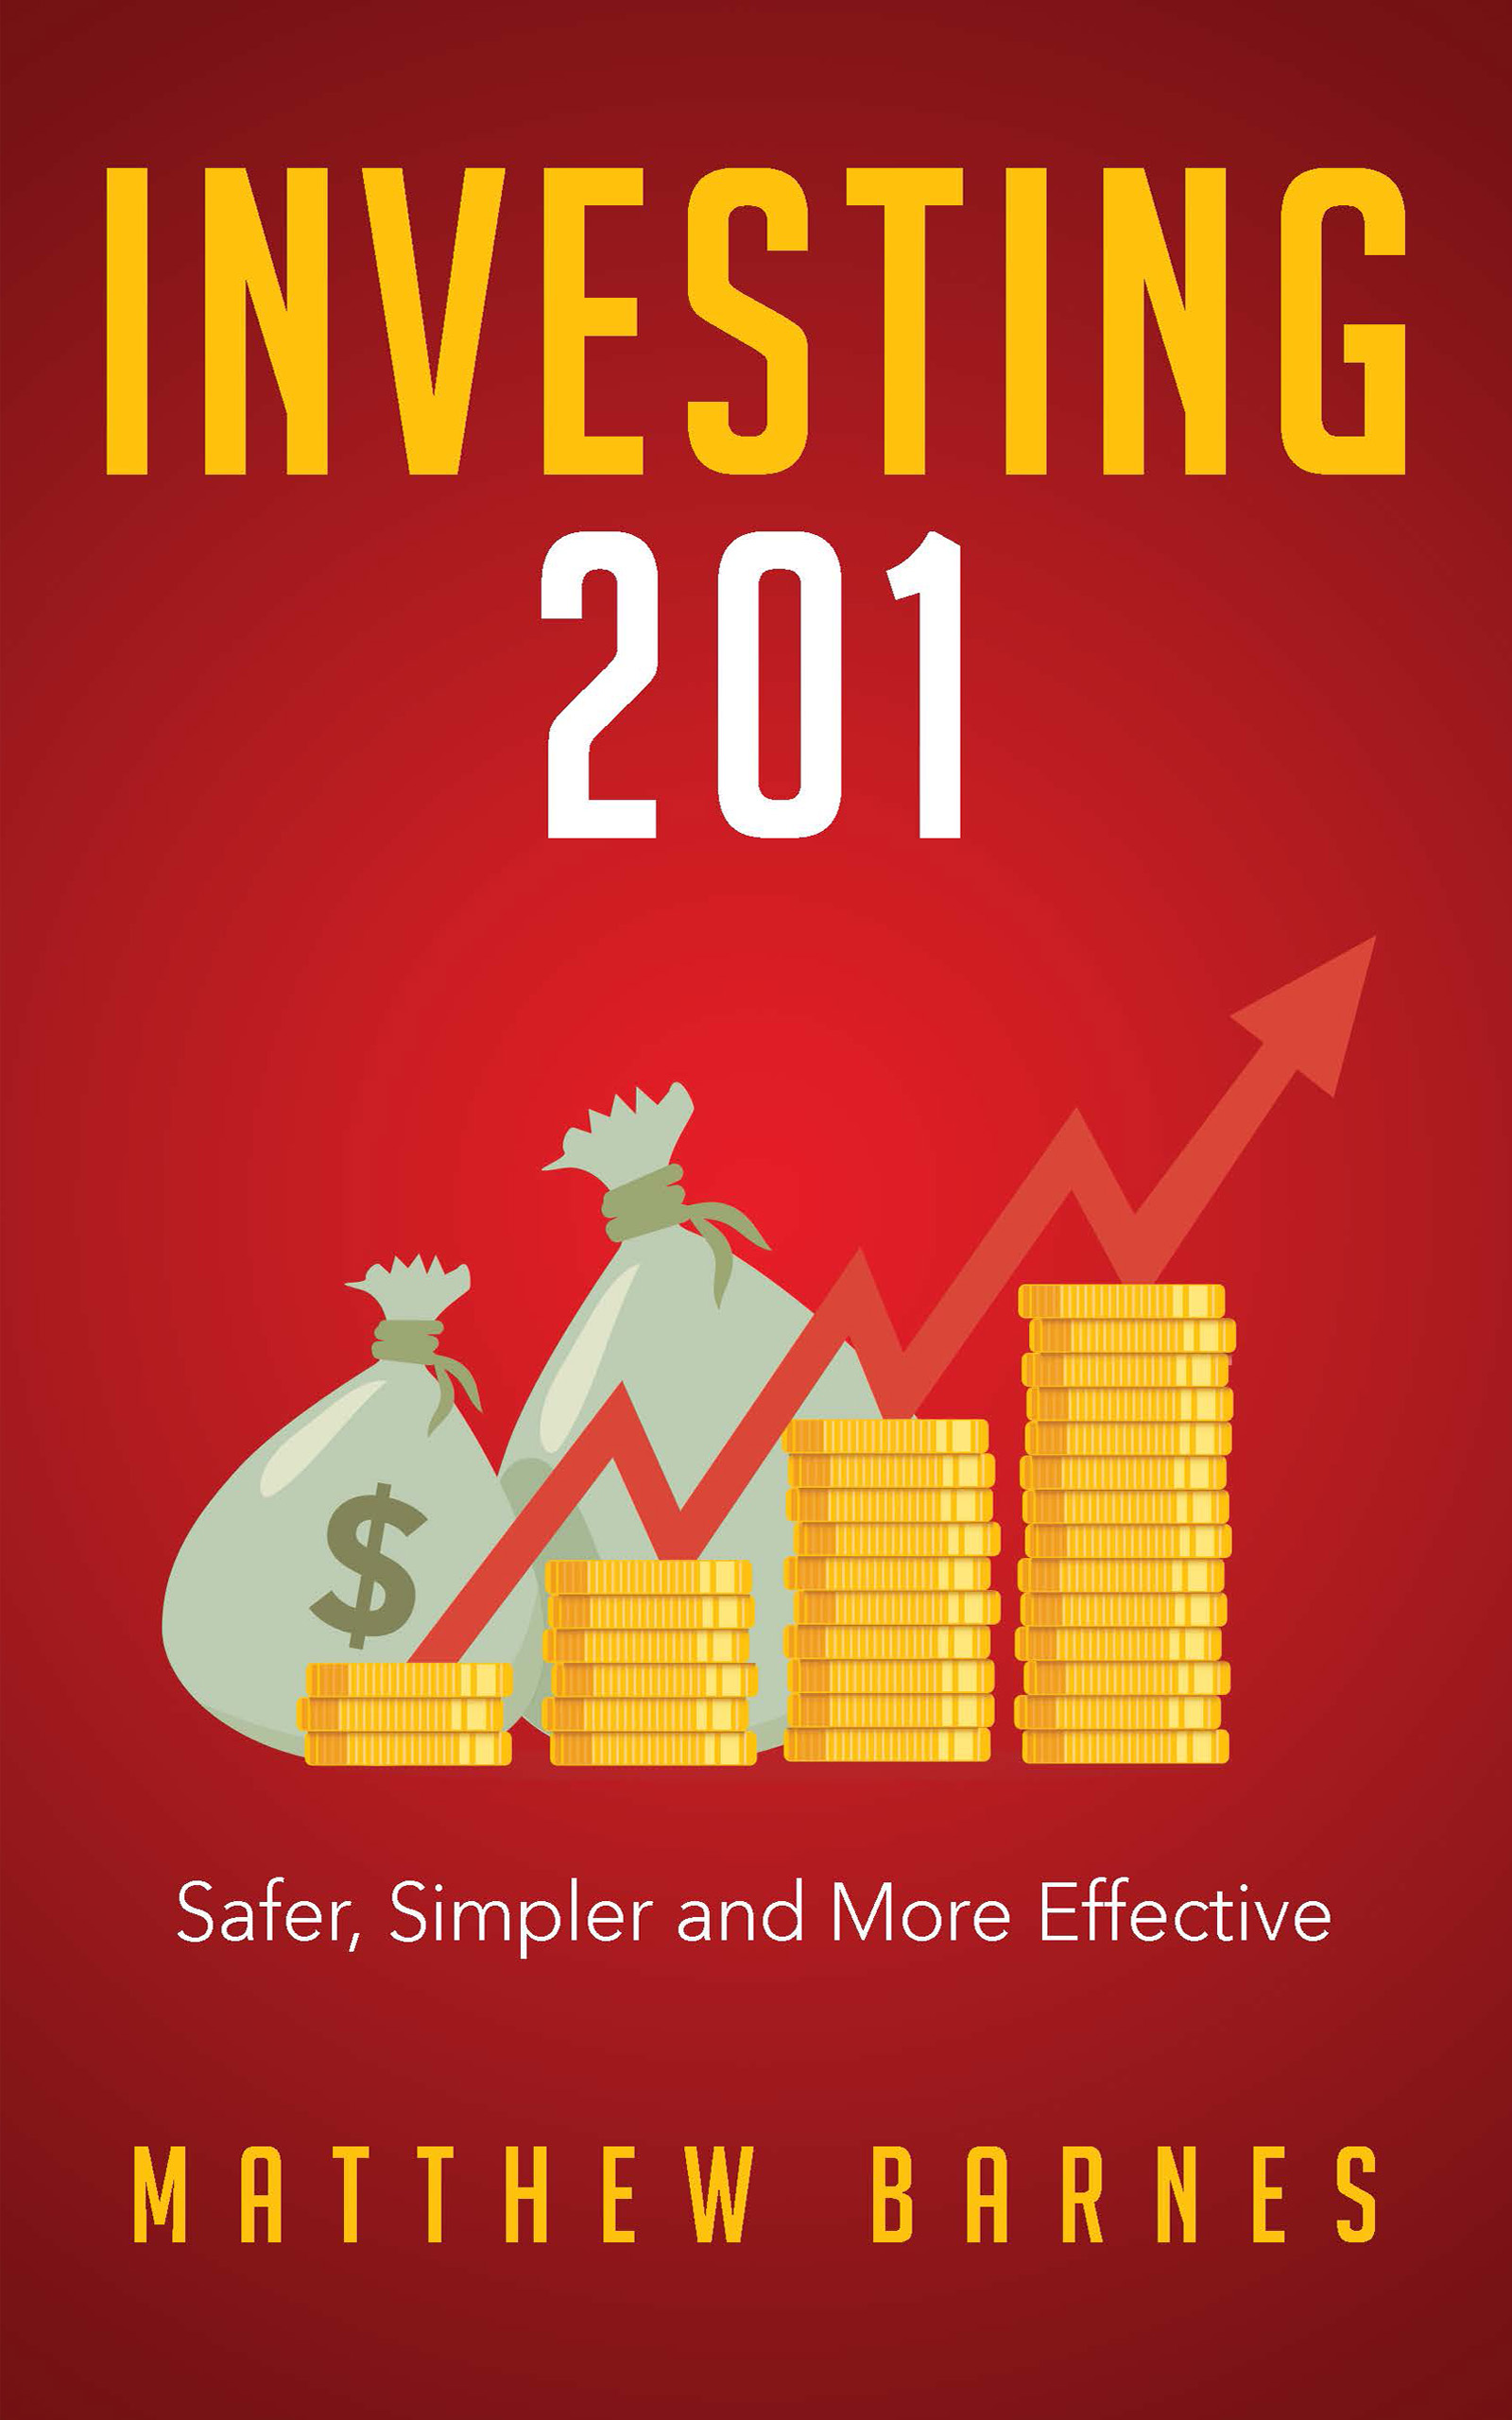 Featured Book Investing 201 Safer, Simpler and More Effective by